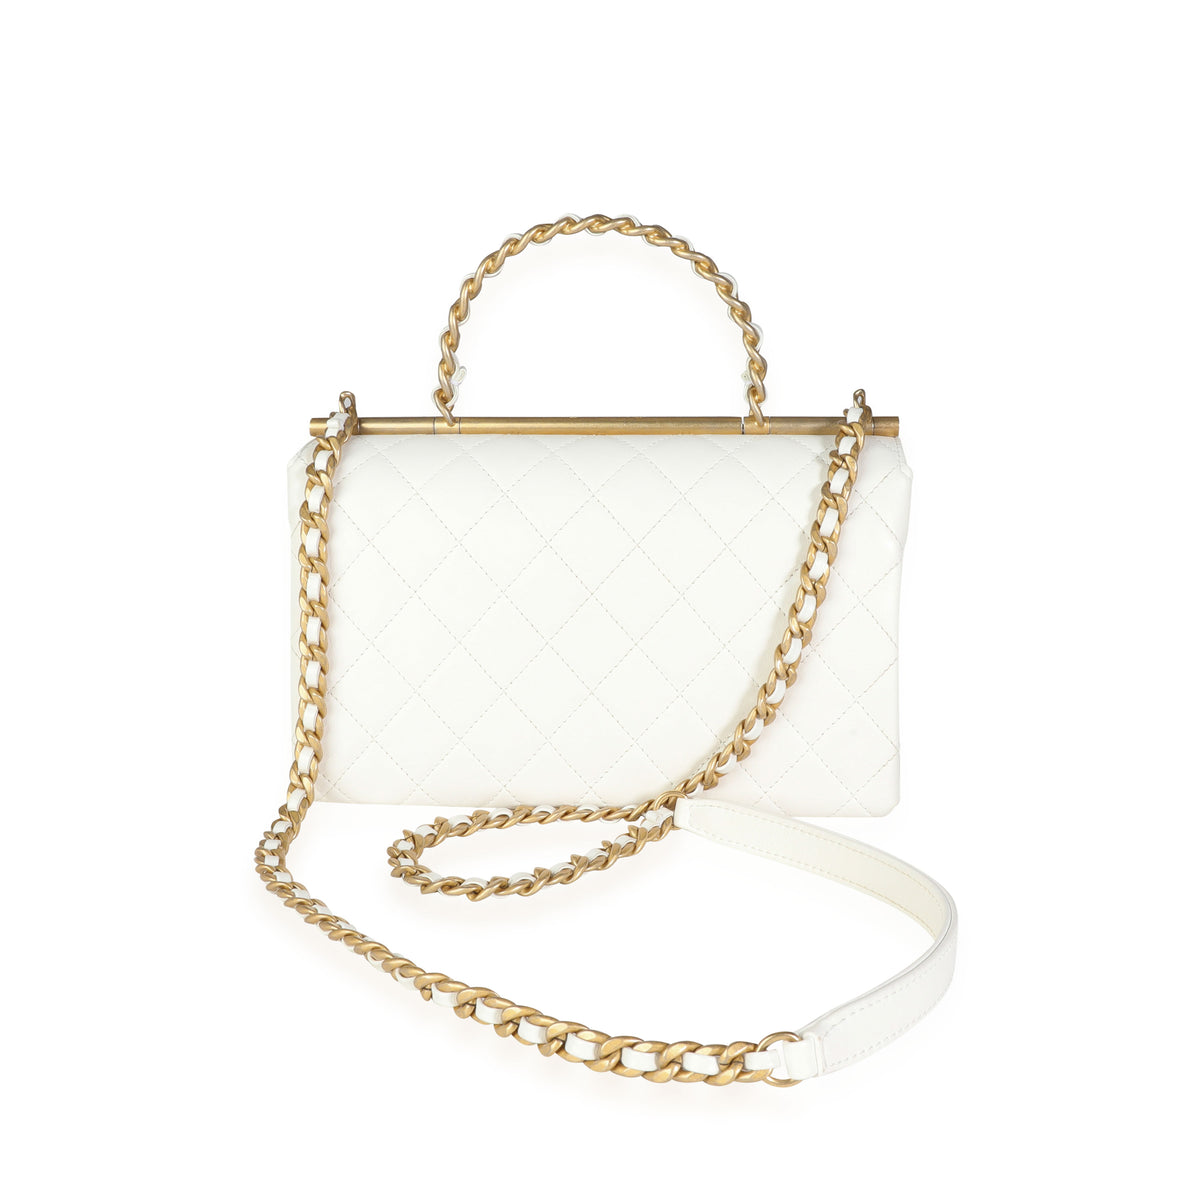 Chanel White Quilted Calfskin Chain Top Handle Flap Bag, myGemma, SG